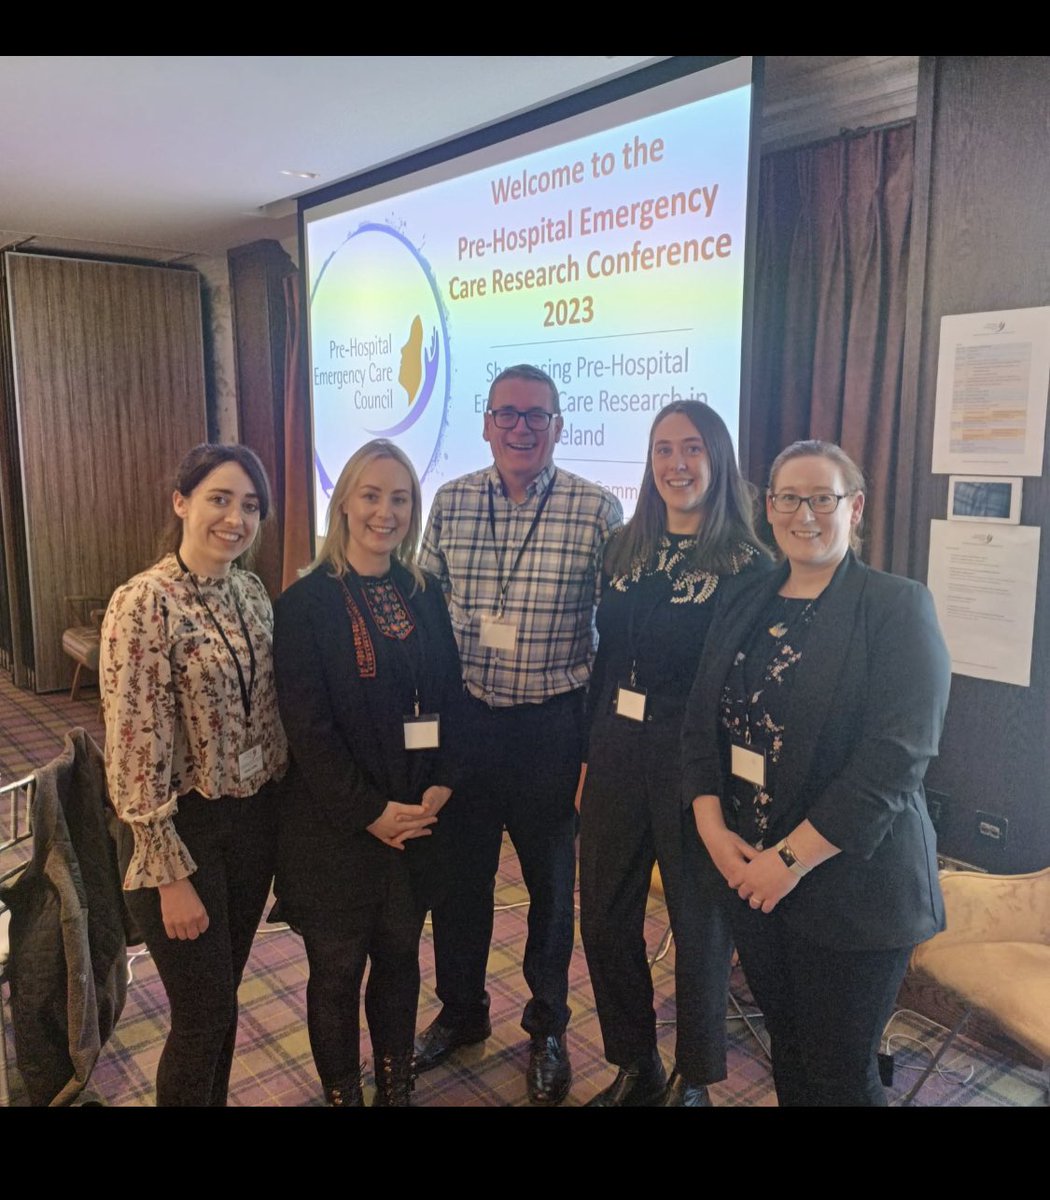 A great day of learning @PHECC research conference this week. Great to meet up with our Cork Pathfinder colleagues and huge congratulations on their winning poster. @BurkeDearbhla @AislinnGriffin1 @vondizzle1 @PathfinderACP @AmbulanceNAS